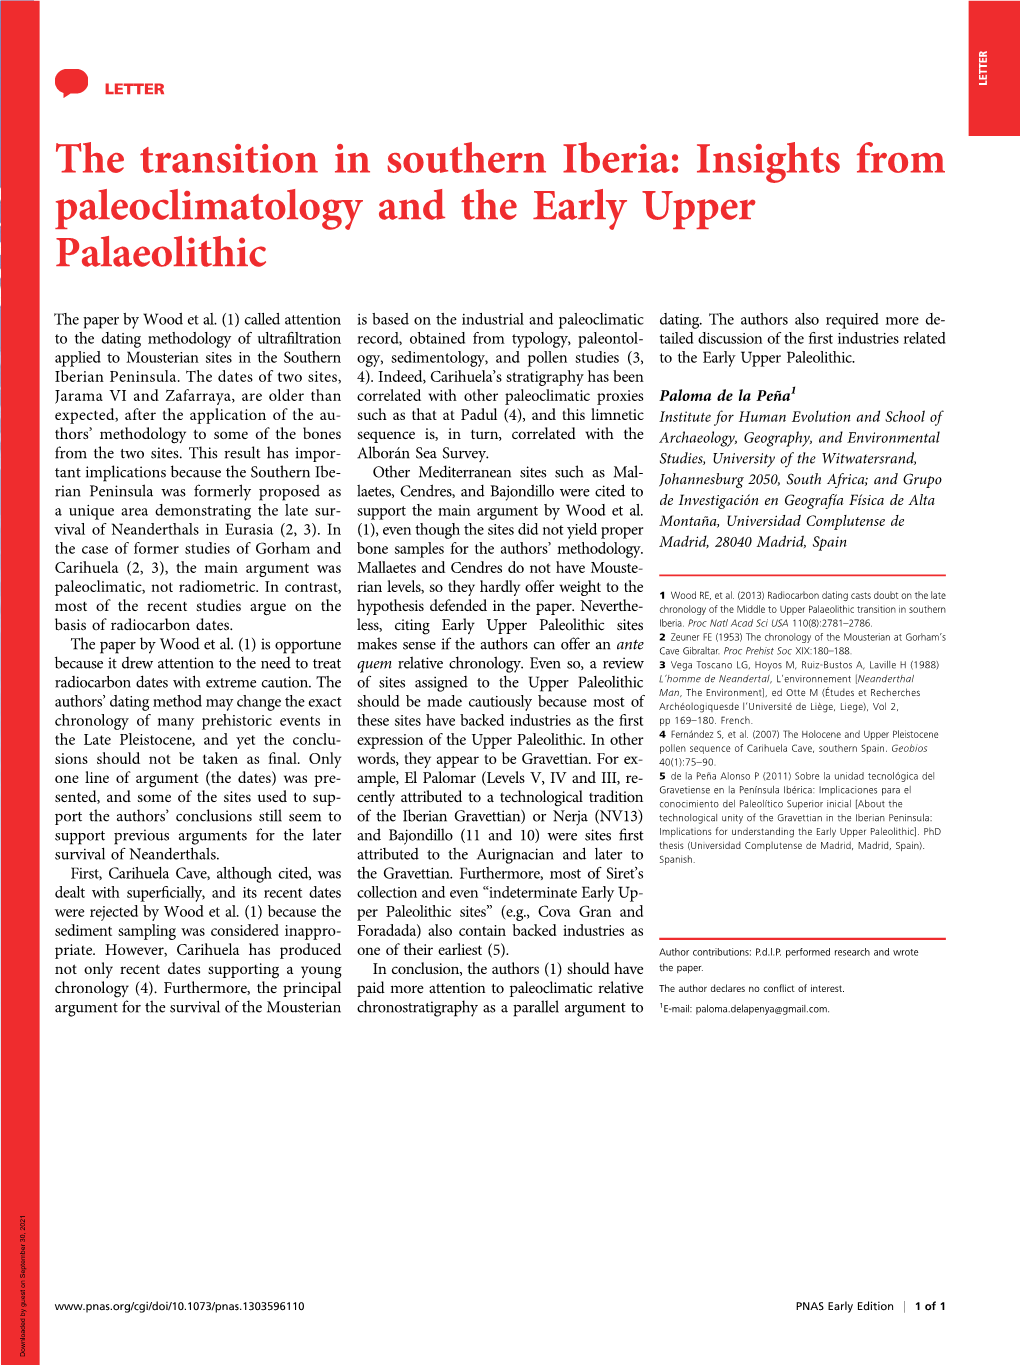 Insights from Paleoclimatology and the Early Upper Palaeolithic